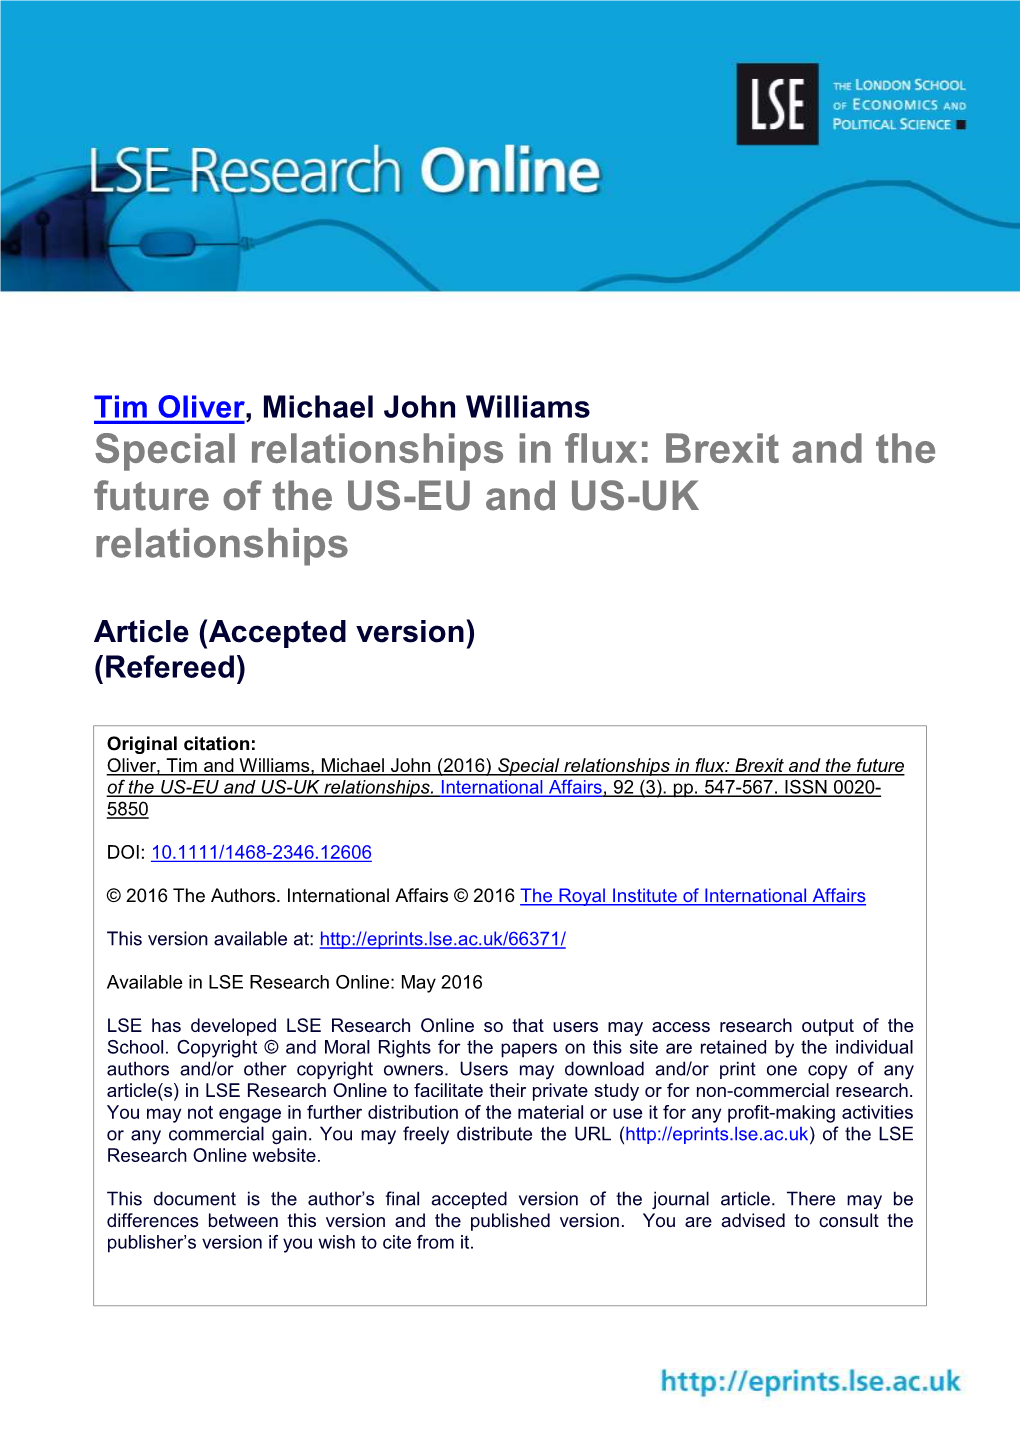 Special Relationships in Flux: Brexit and the Future of the US-EU and US-UK Relationships